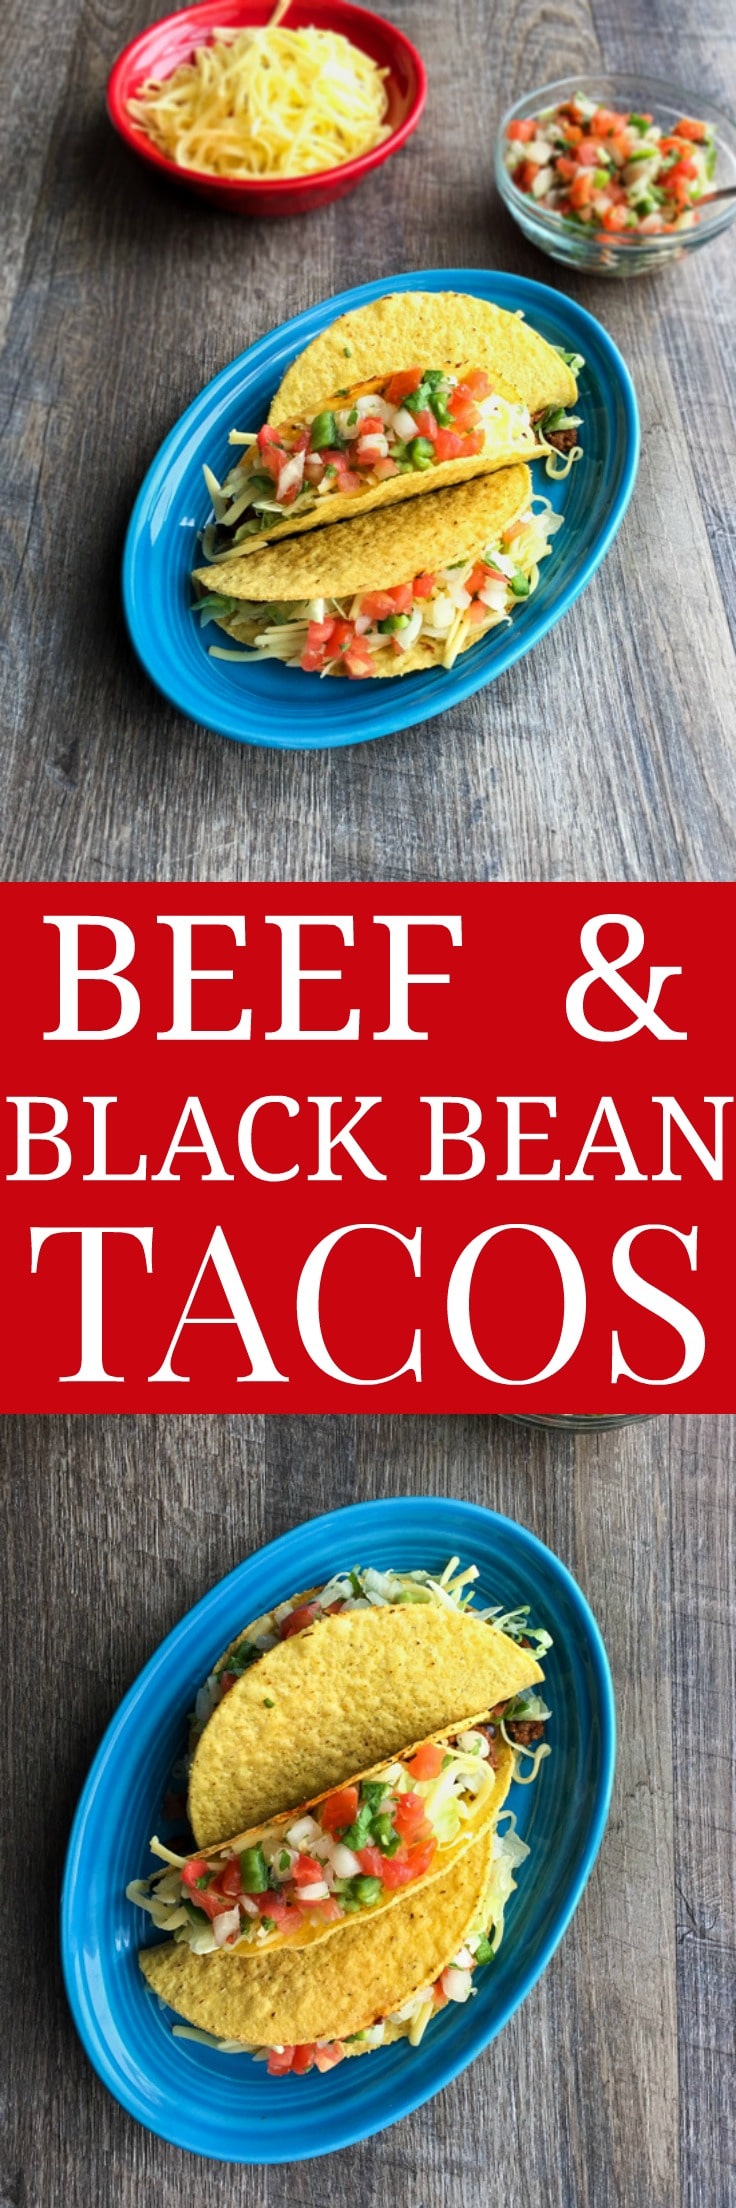 Beef and Black Bean Tacos - Healthier Dishes